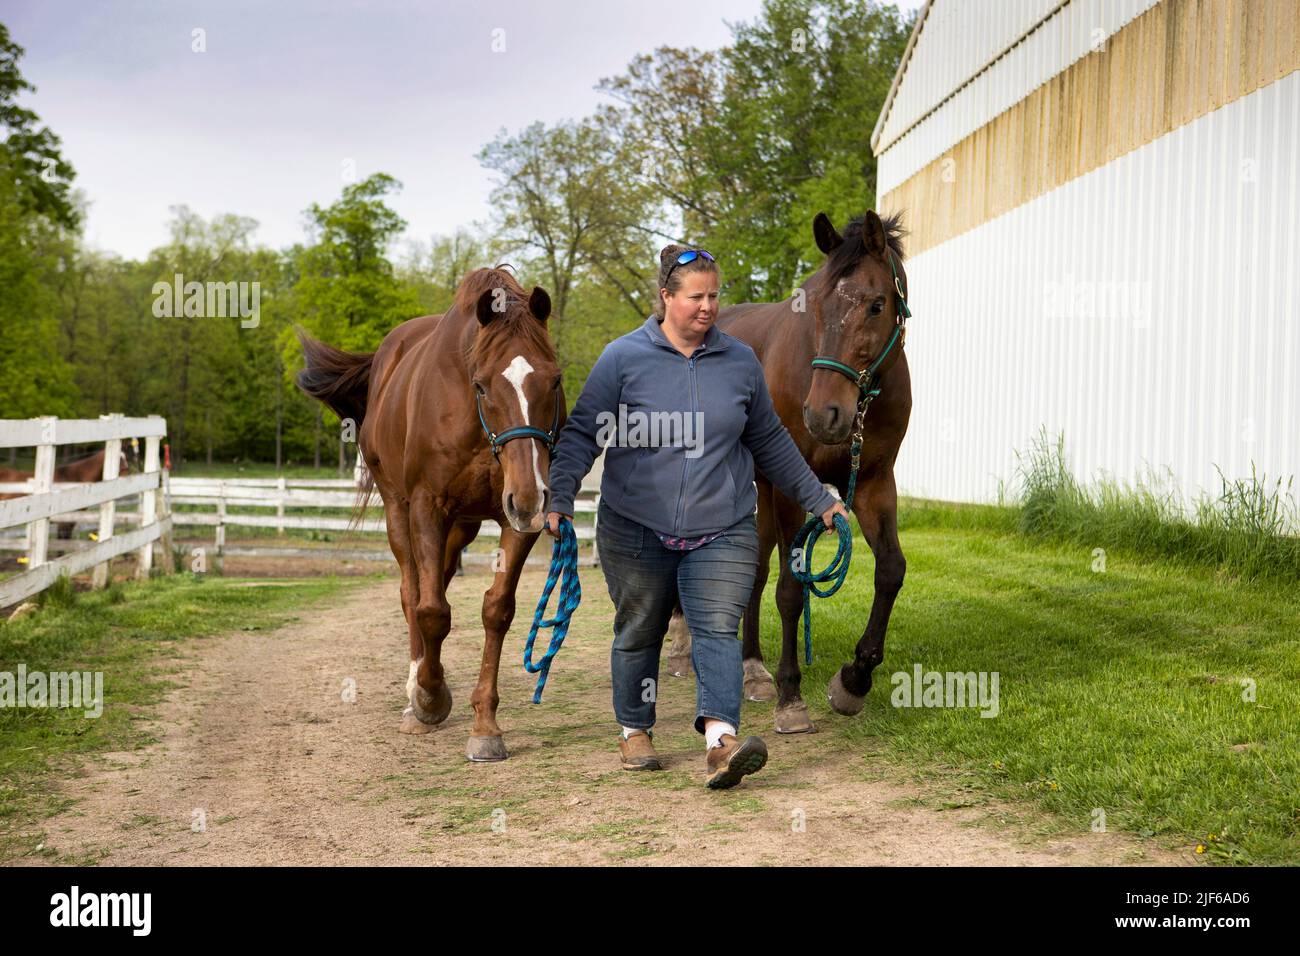 A woman leading two horses on a path next to a barn. Stock Photo